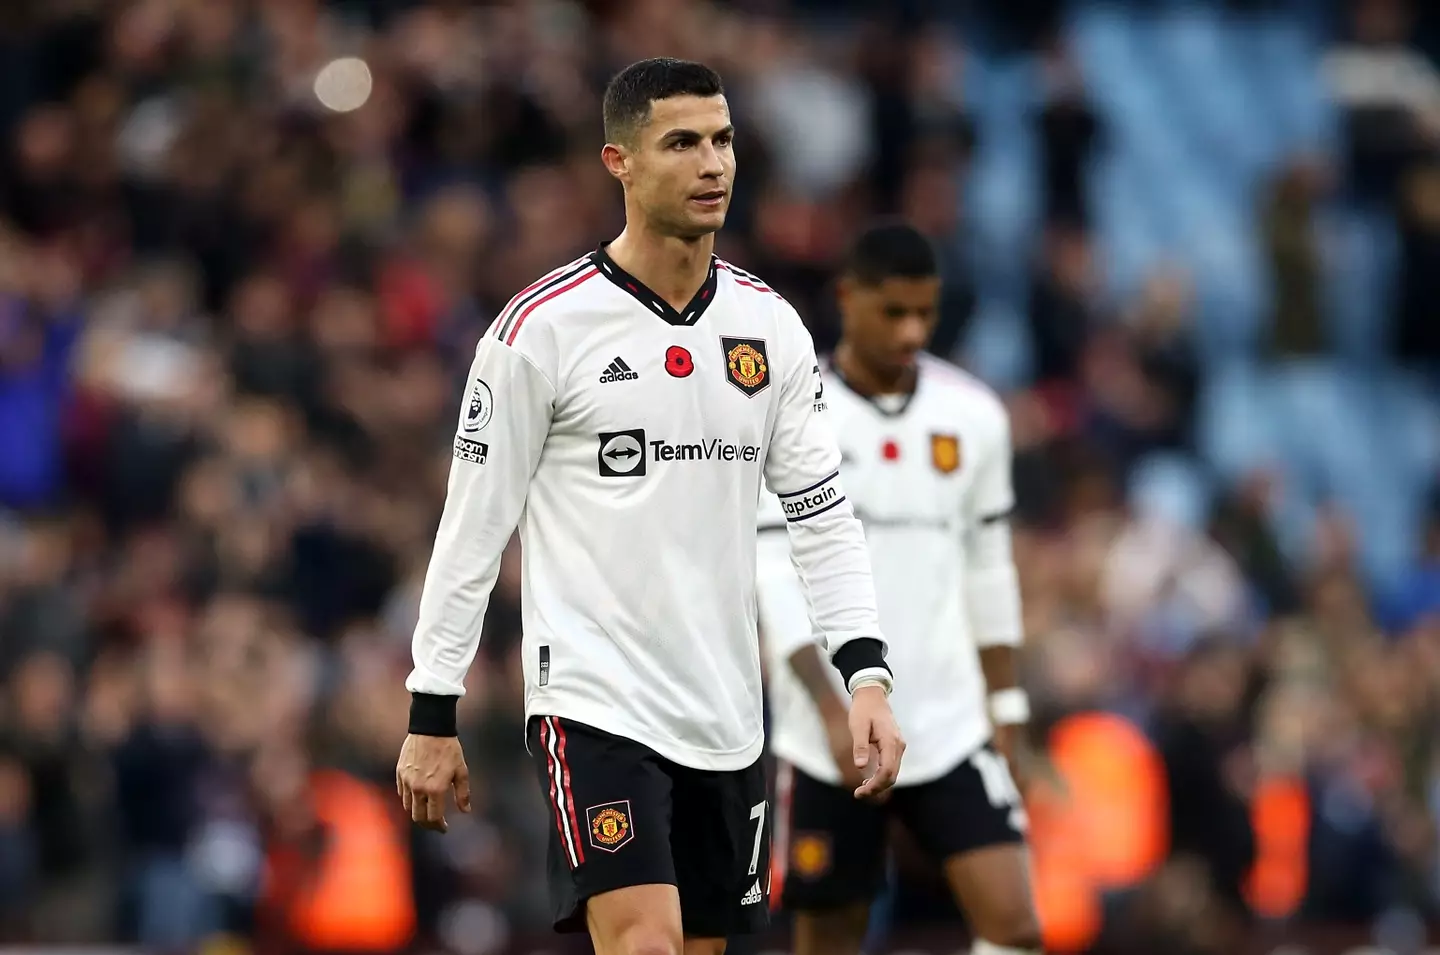 Ronaldo's last appearance to date was at Villa Park earlier this month. (Image